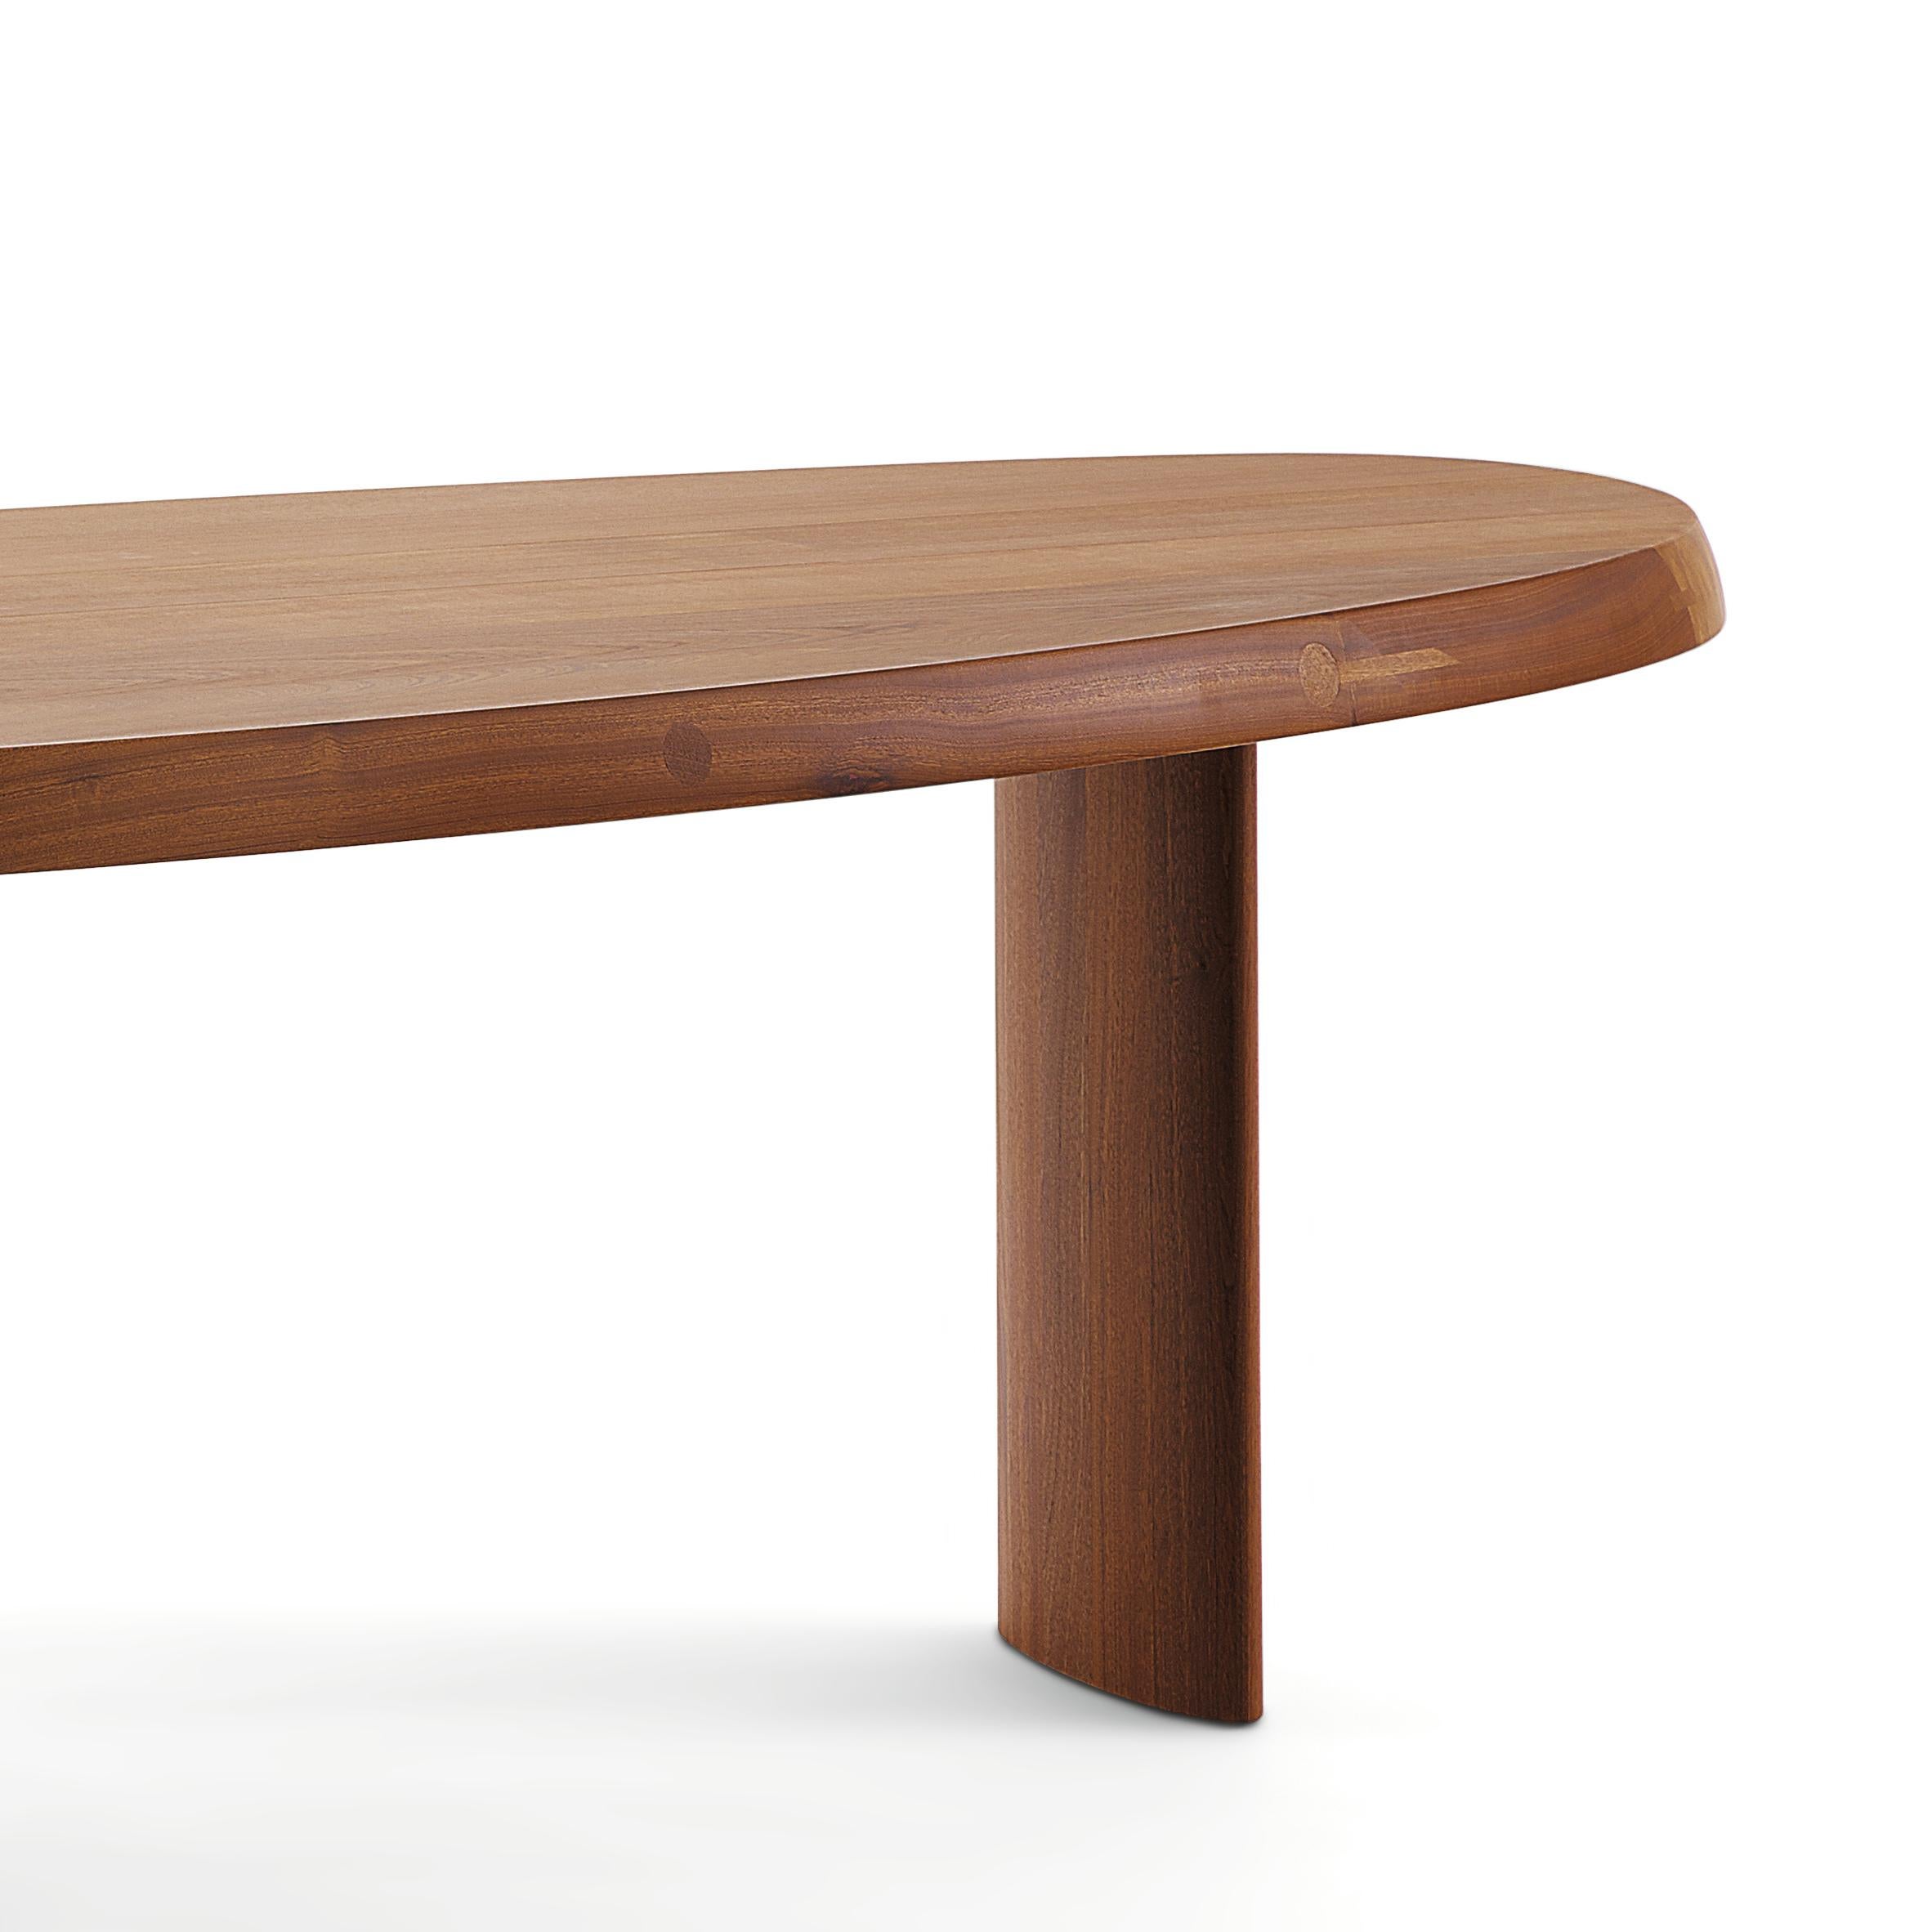 Italian Charlotte Perriand Table En Forme Libre, Wood by Cassina For Sale